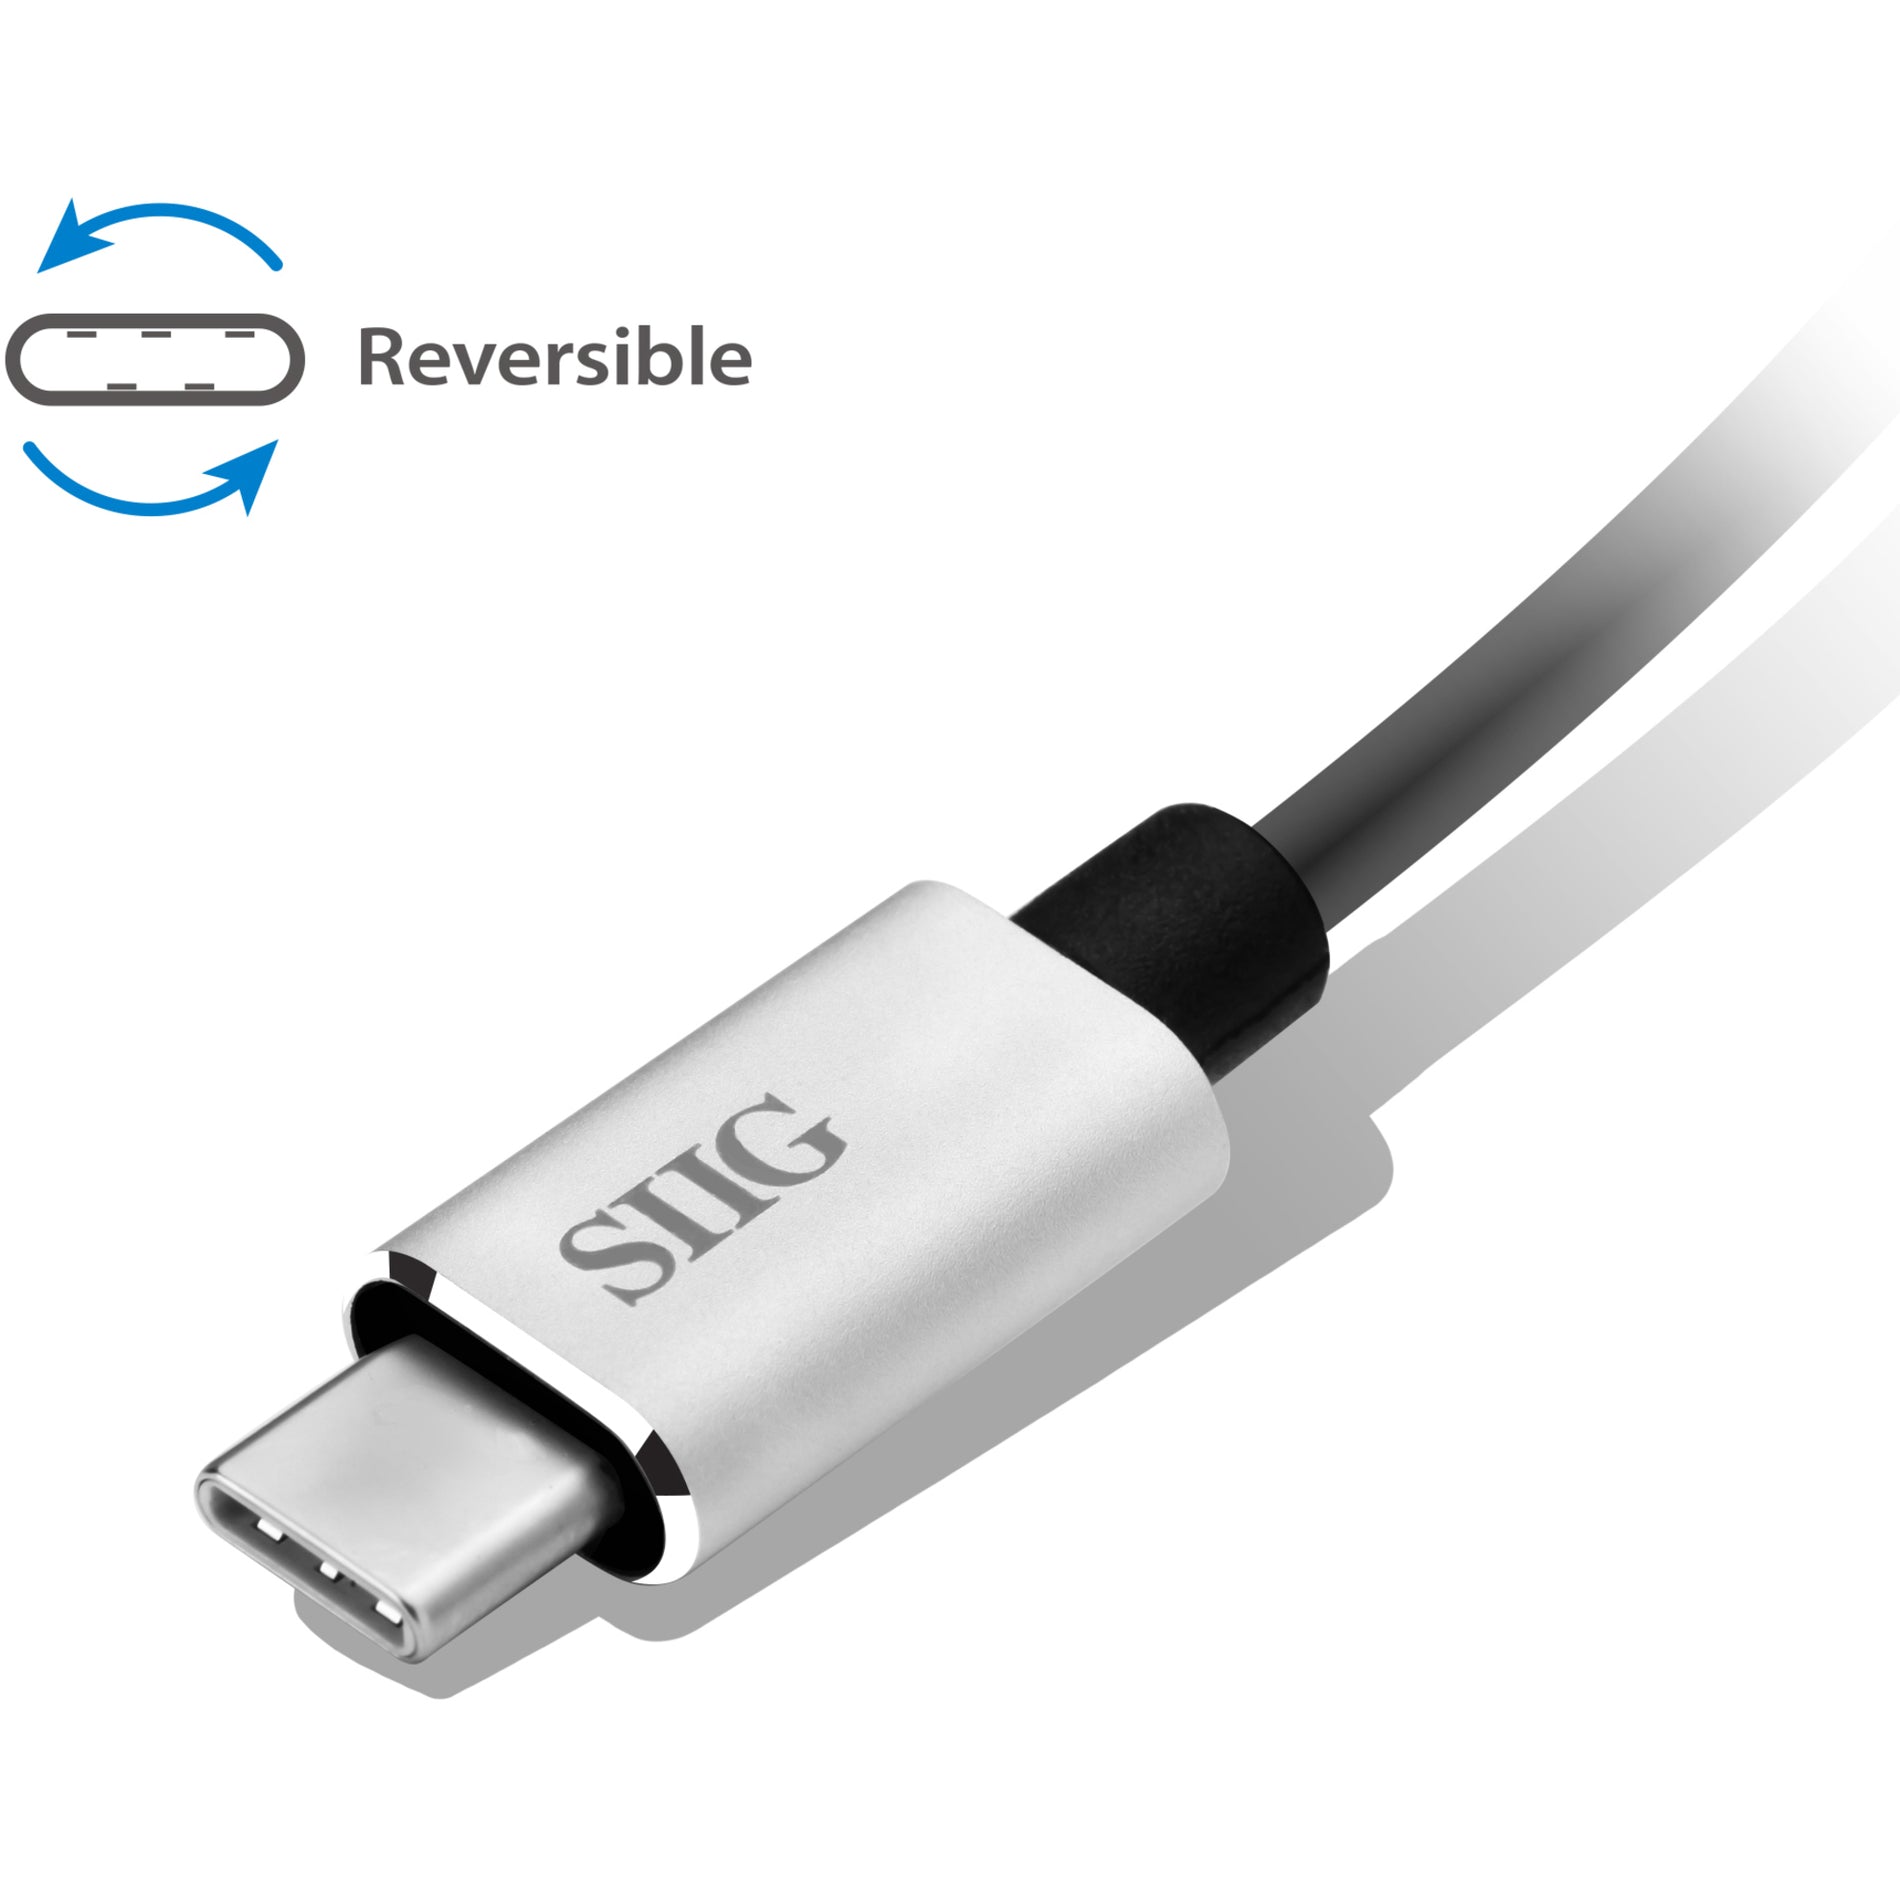 SIIG JU-MR0F12-S1 USB-C 2-in-1 Card Reader for SD & Micro SD, Silver, USB 3.0 Type C